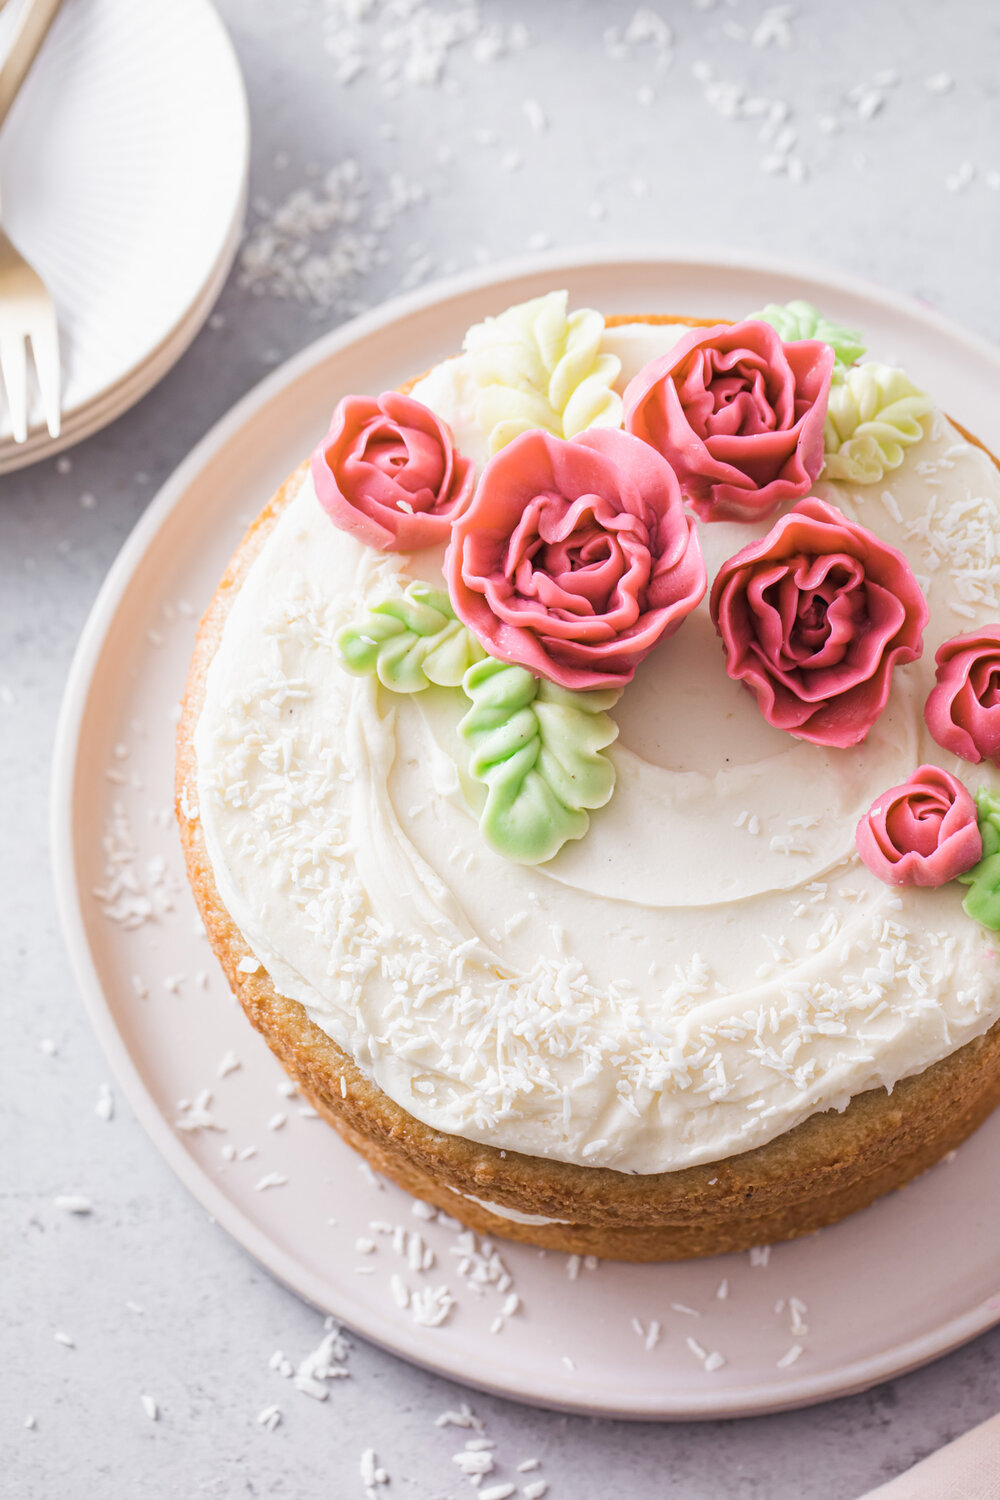 Almond Layer Cake with cream cheese frosting and buttercream flowers